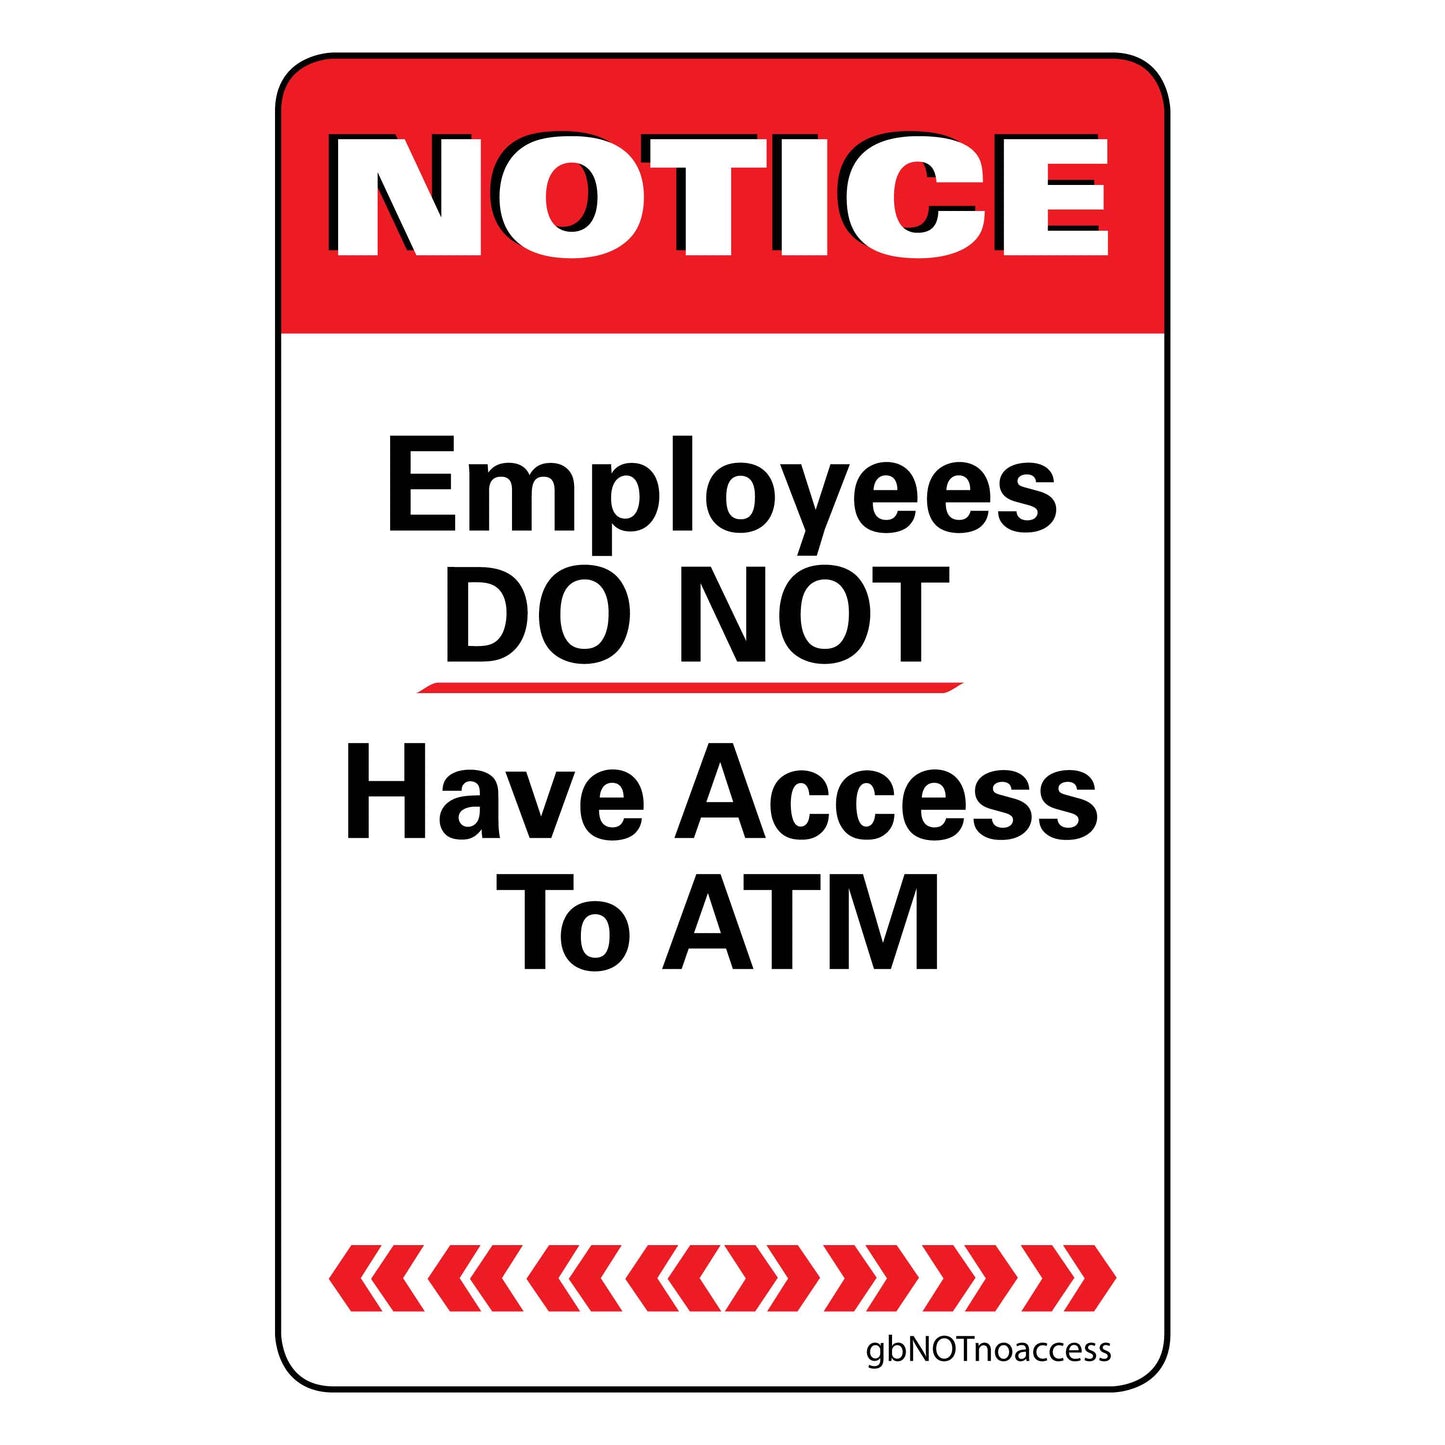 Employees Do Not Have Access to ATM Decal. 2 inches by 3 inches in size.